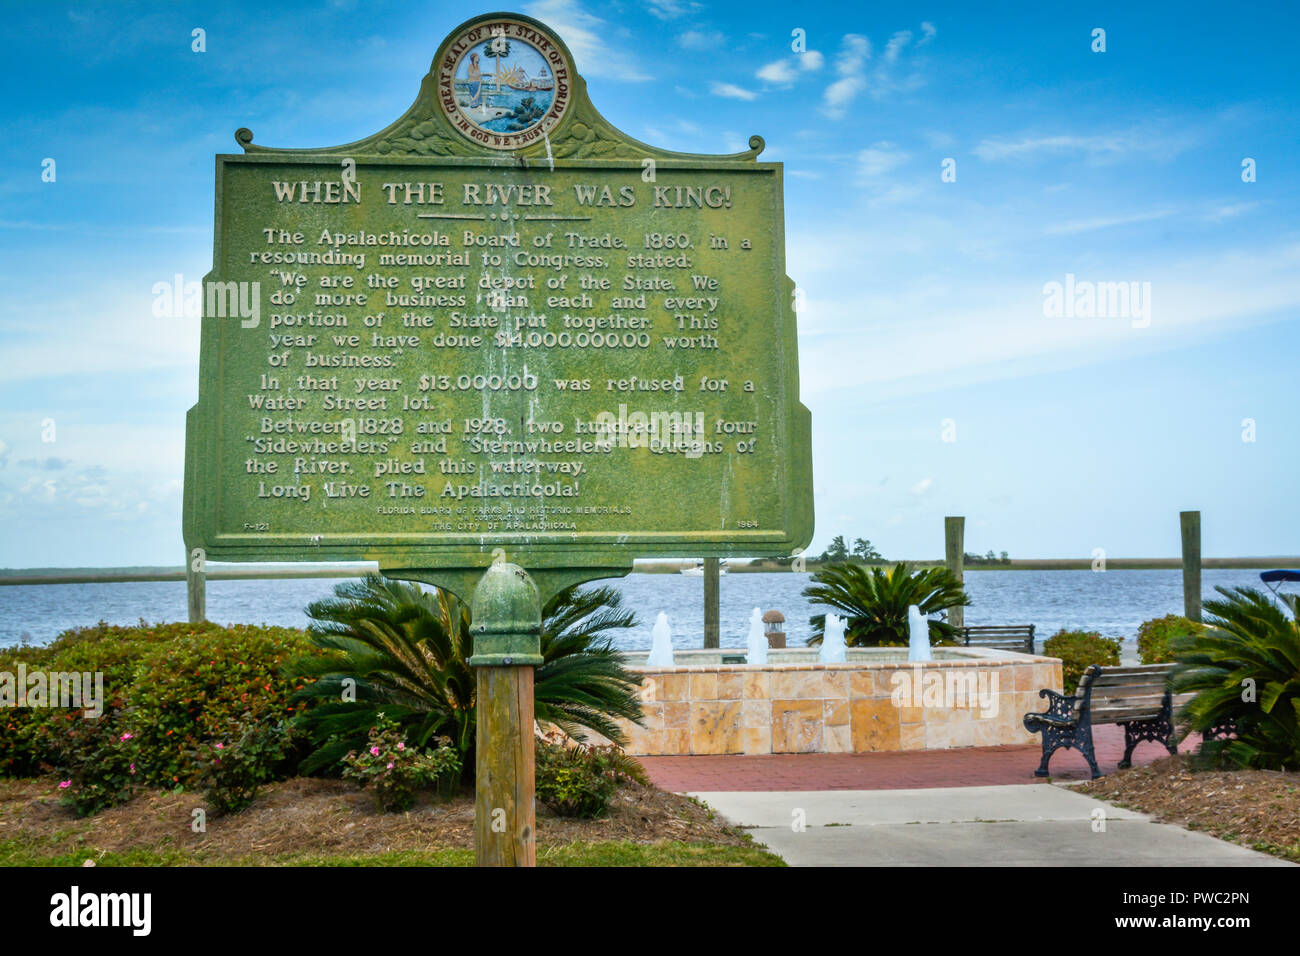 Apalachicola in the Florida Panhandle offers many restaurants & shopping outlets, and this historical plaque memorialized the Apalachicola waterways Stock Photo